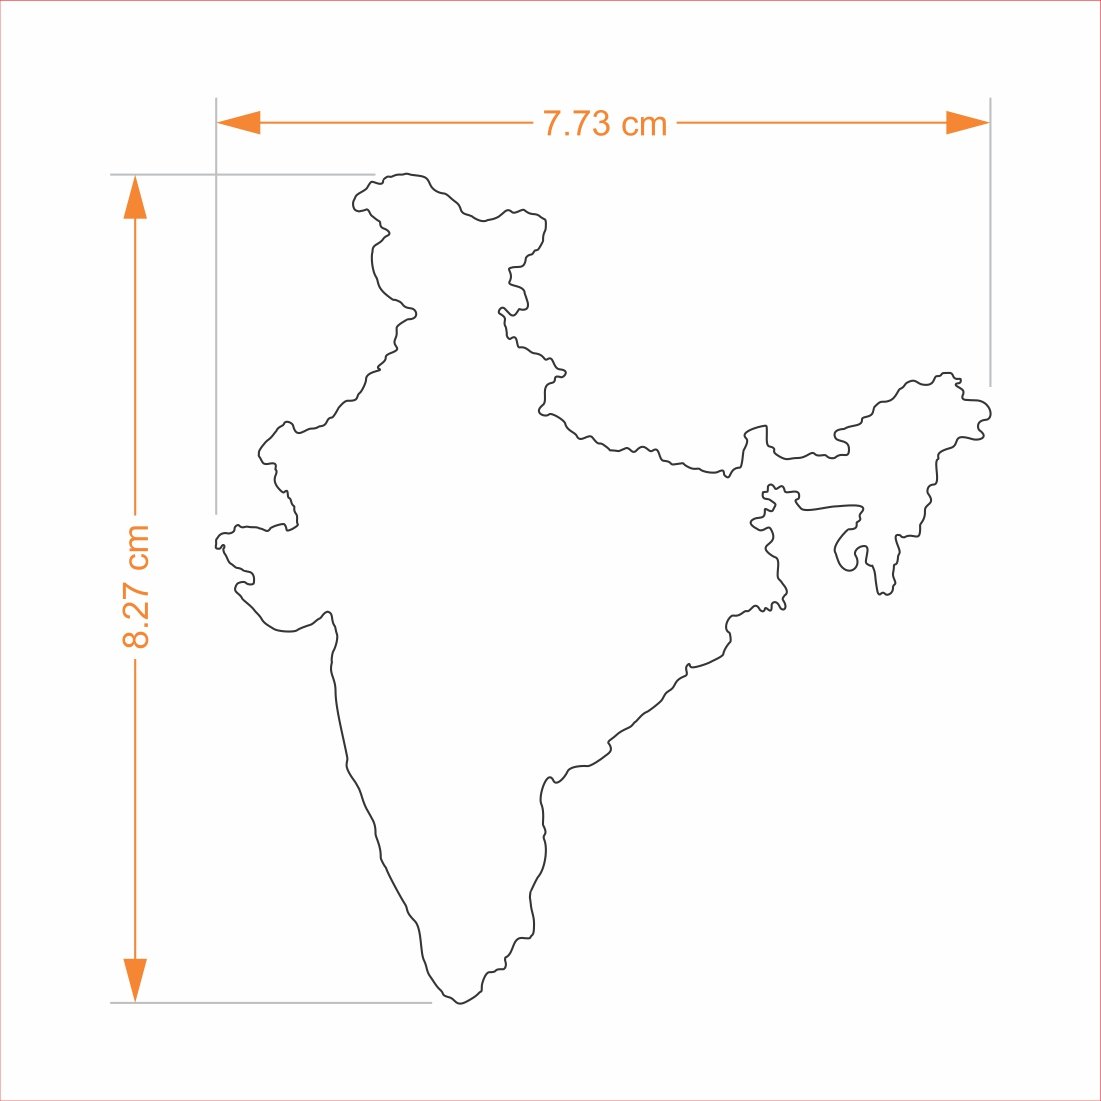 draw a india map for my project please send a picture of india map​ -  Brainly.in